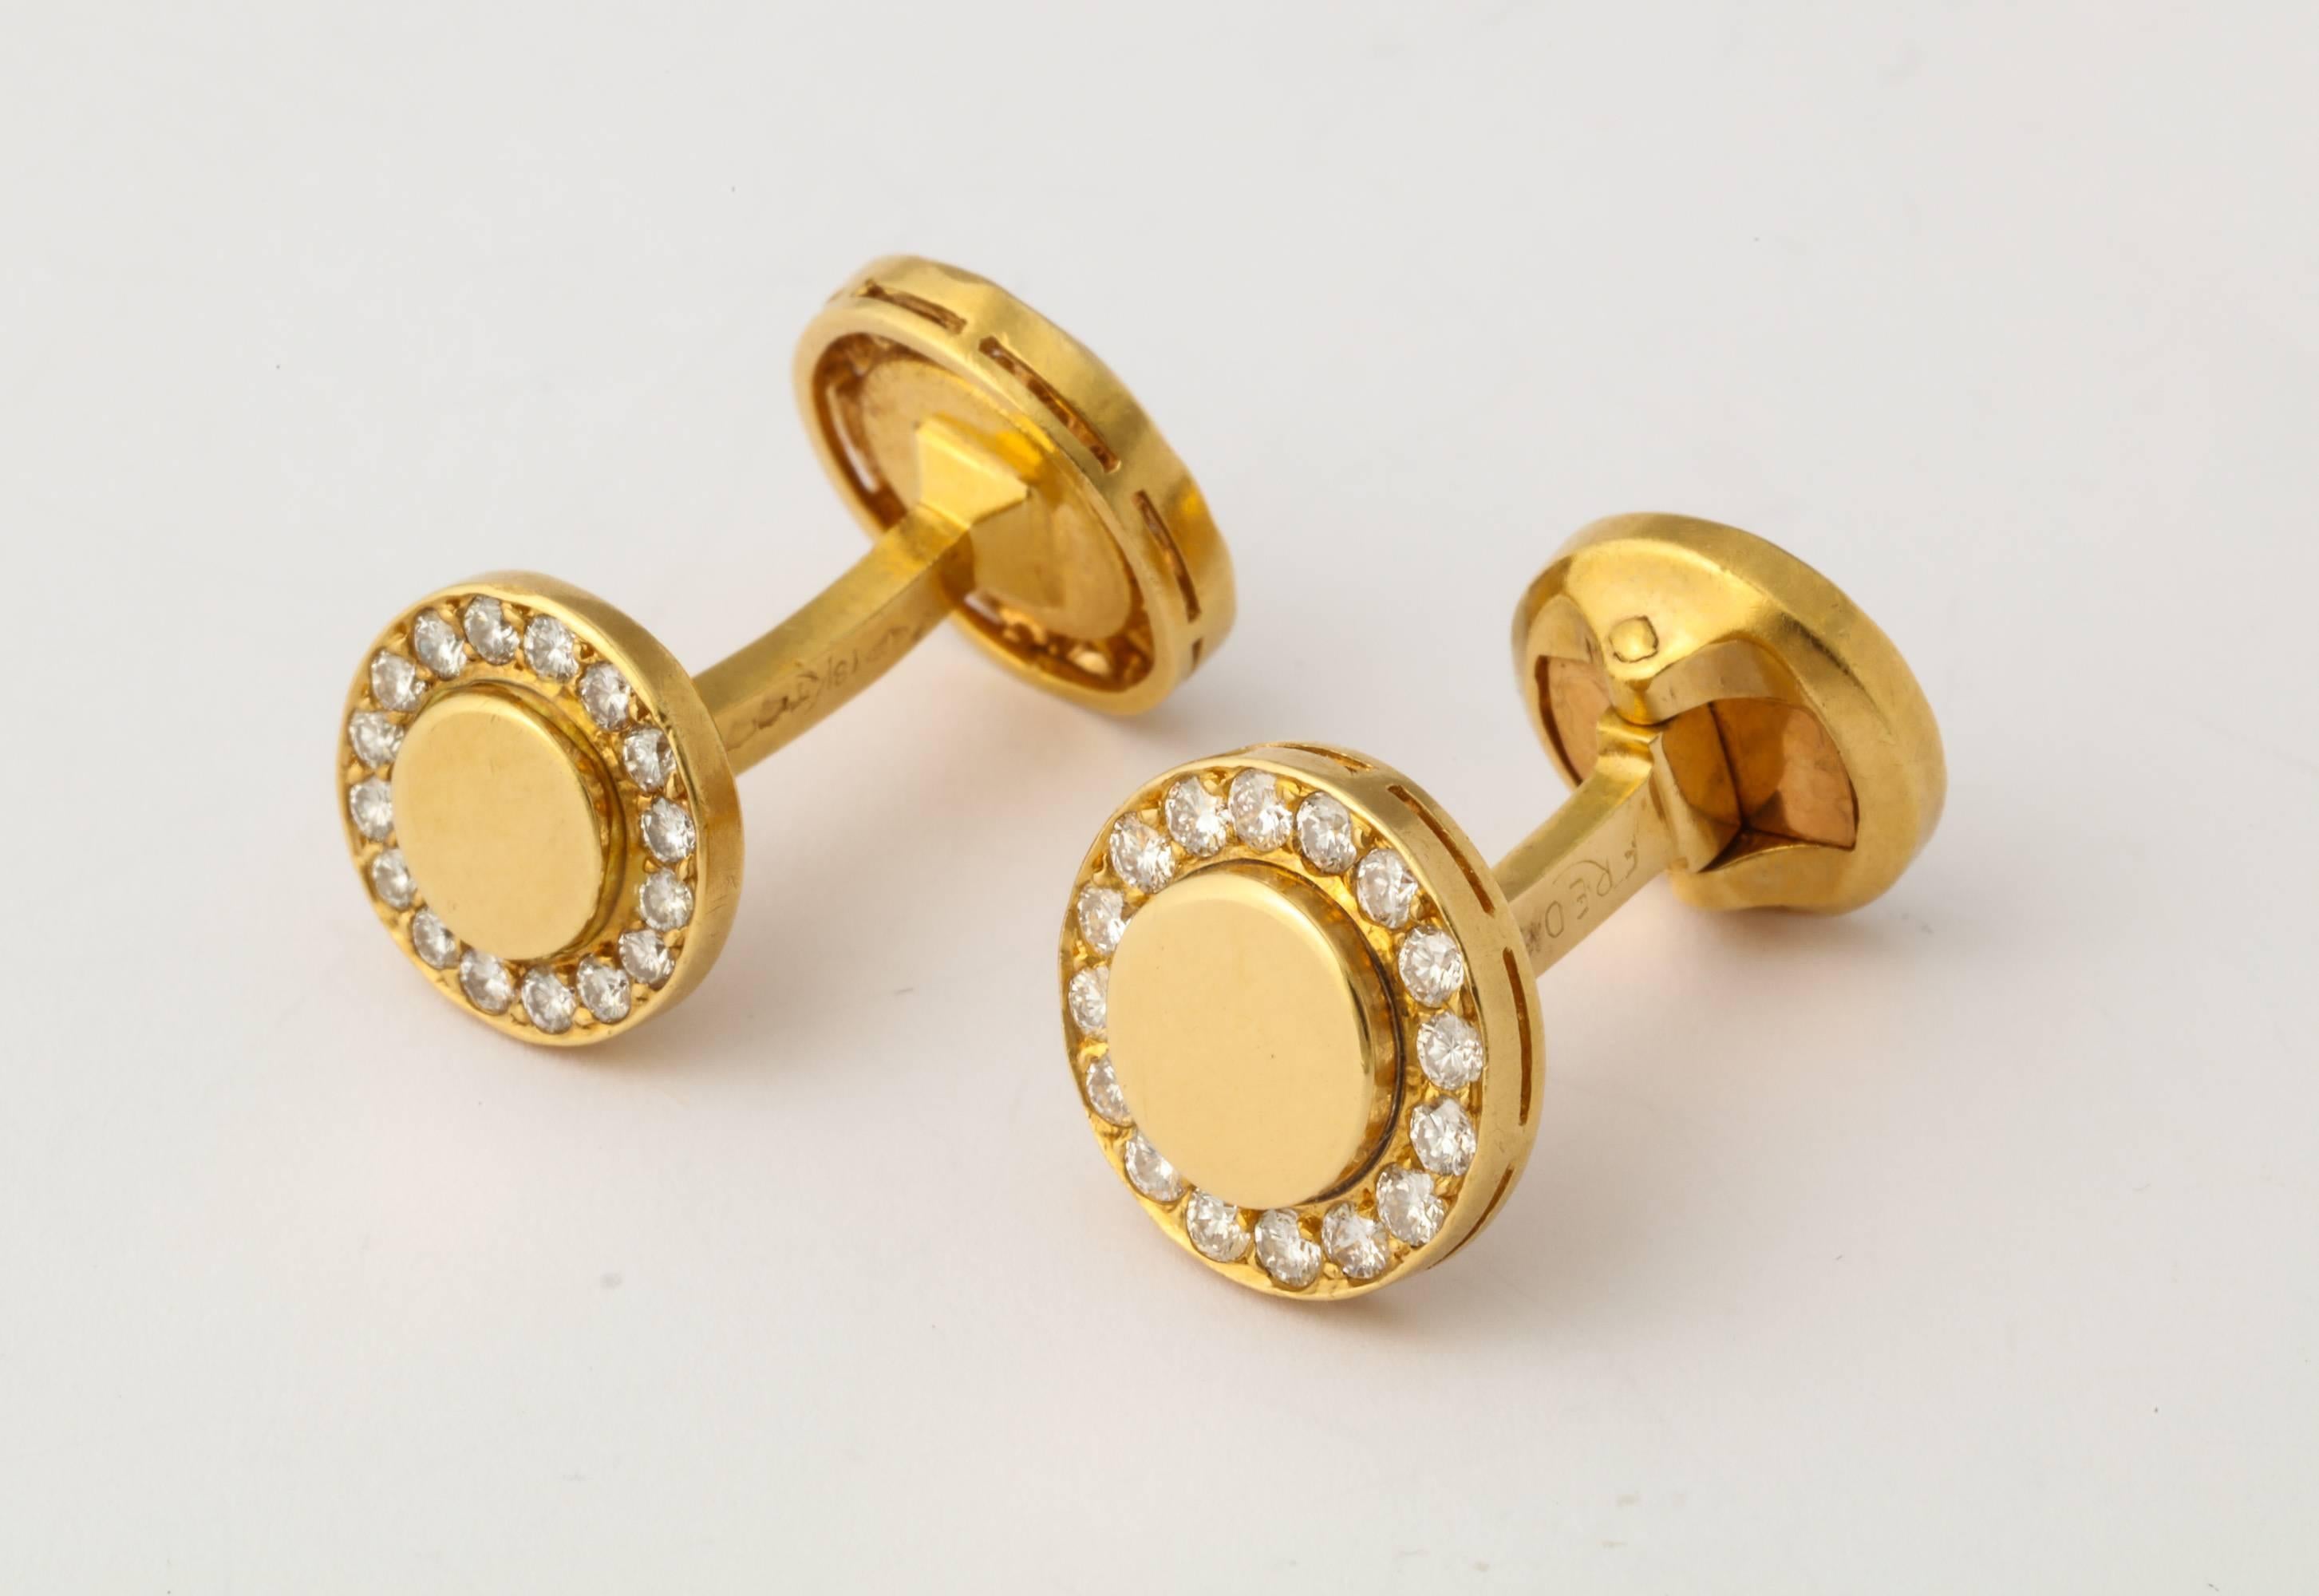 Handsome and simply elegant 18K gold and diamond cufflinks from Fred-Paris. 1/2 in diameter. Multiple gold and maker marks.